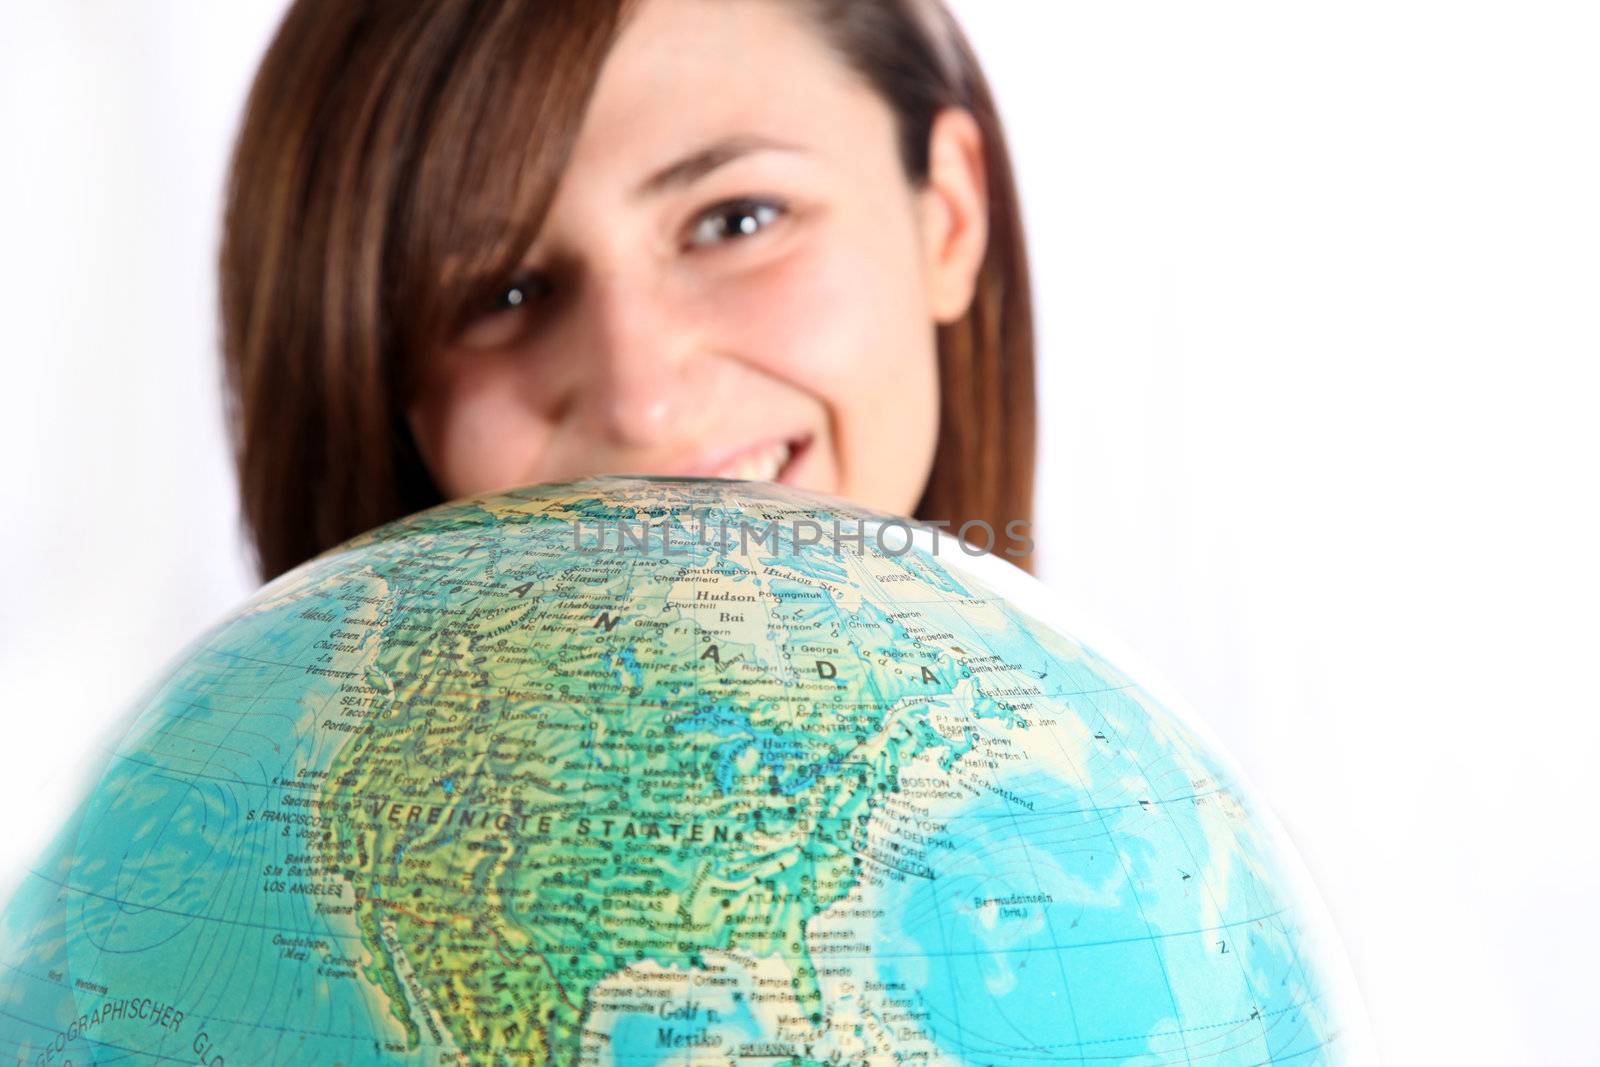 Smiling woman looking over a globe.  by Farina6000